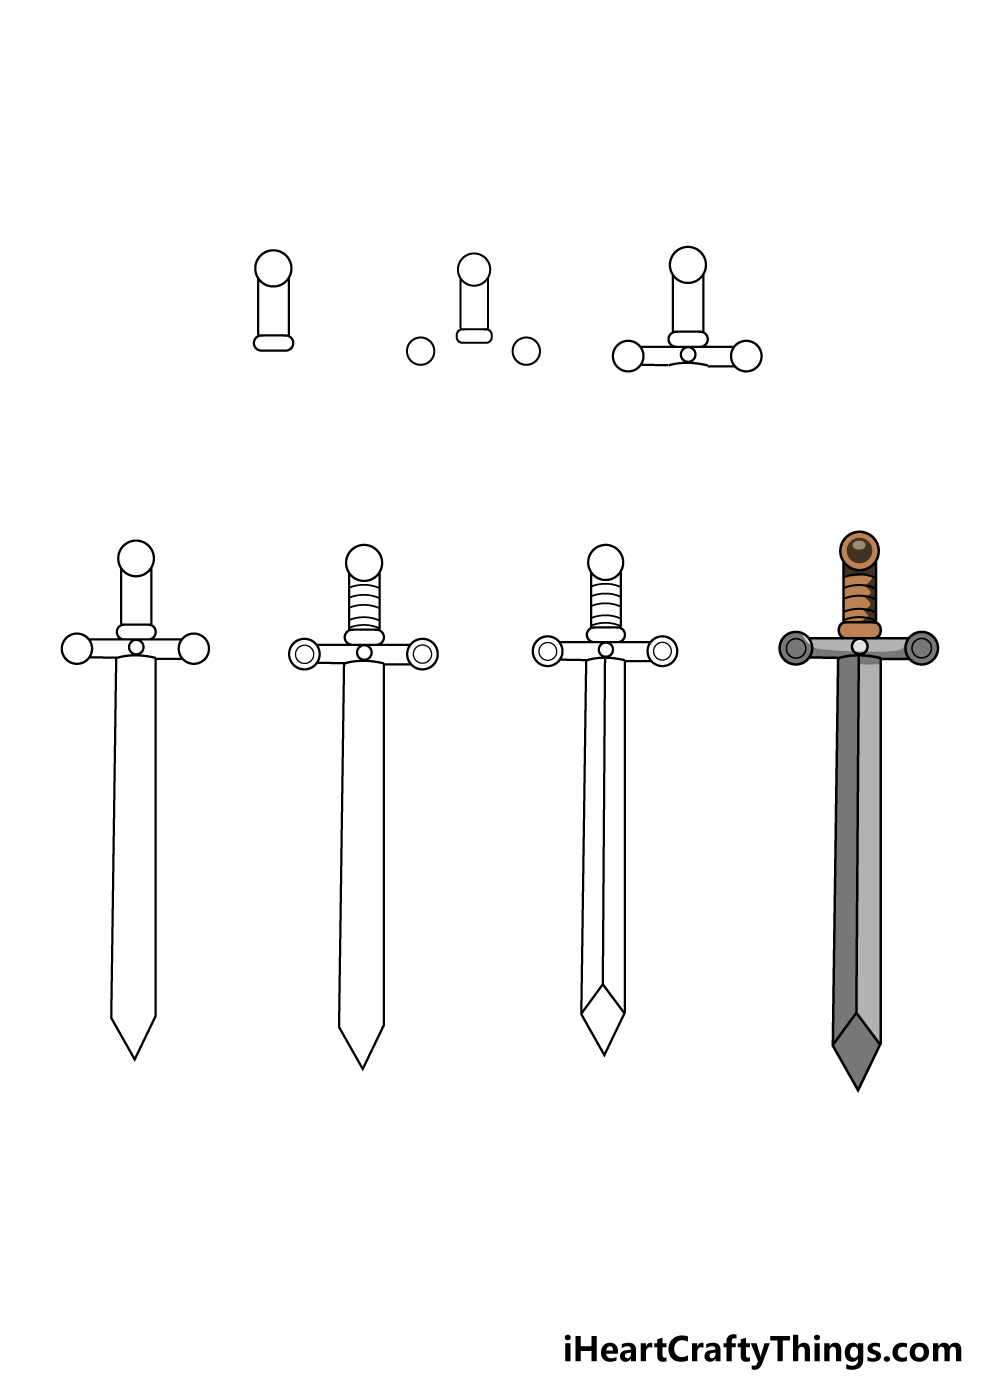 Sword Drawing - How To Draw A Sword Step By Step